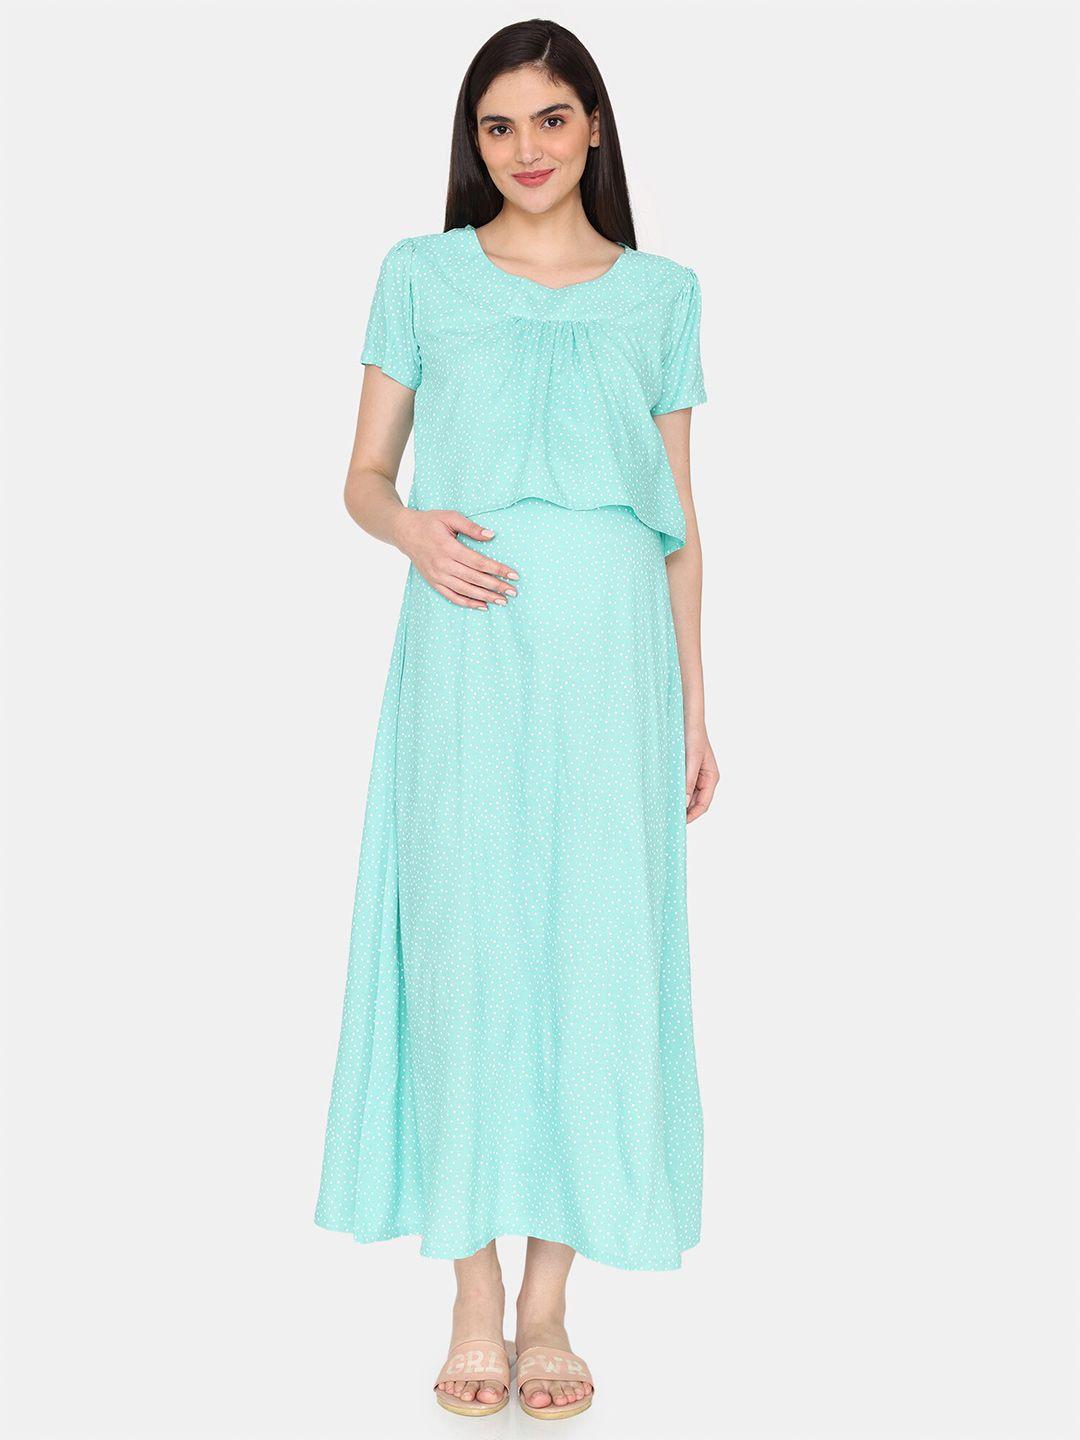 coucou-by-zivame-polka-dots-printed-maternity-maxi-nightdress